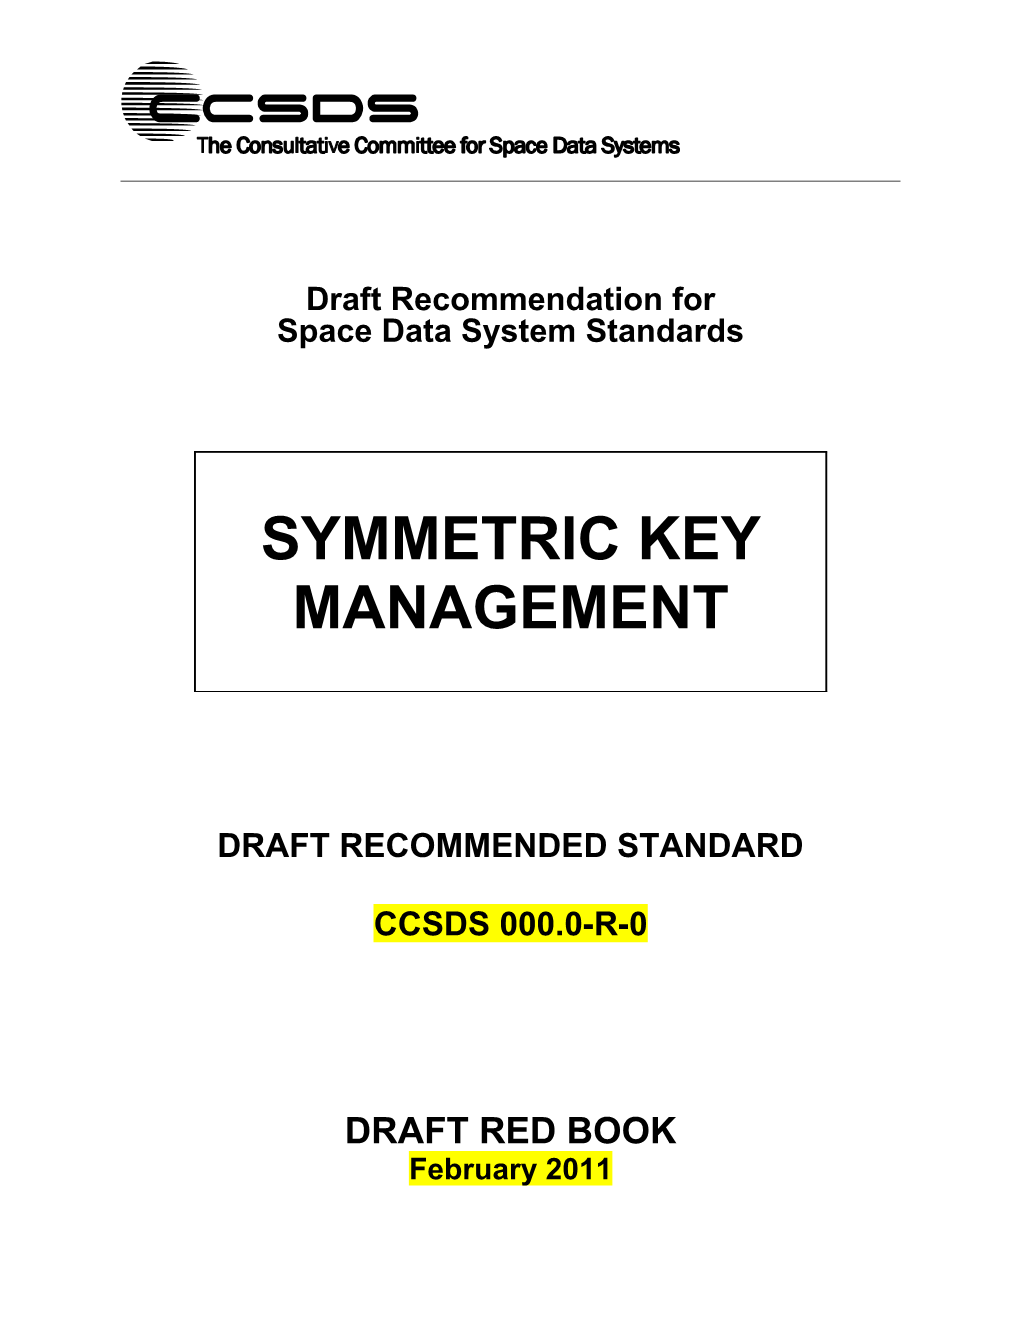 Draft Recommendation for Space Data System Standards